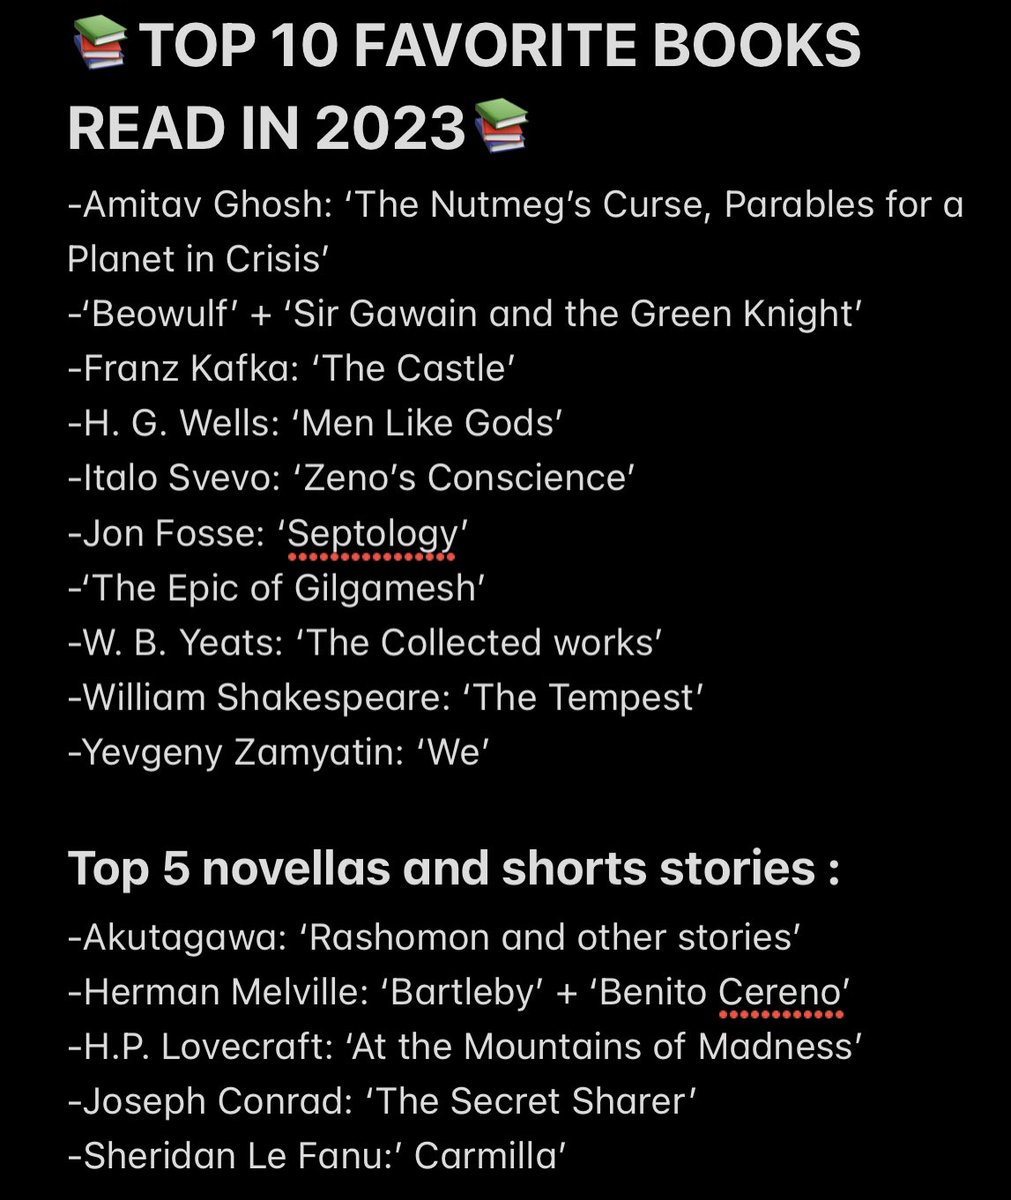 📚 Favorite books read in 2023
#BestOf2023 #Top10 #BookTwitter #BookRecommendations #top5 #BooksWorthReading #Top10listing